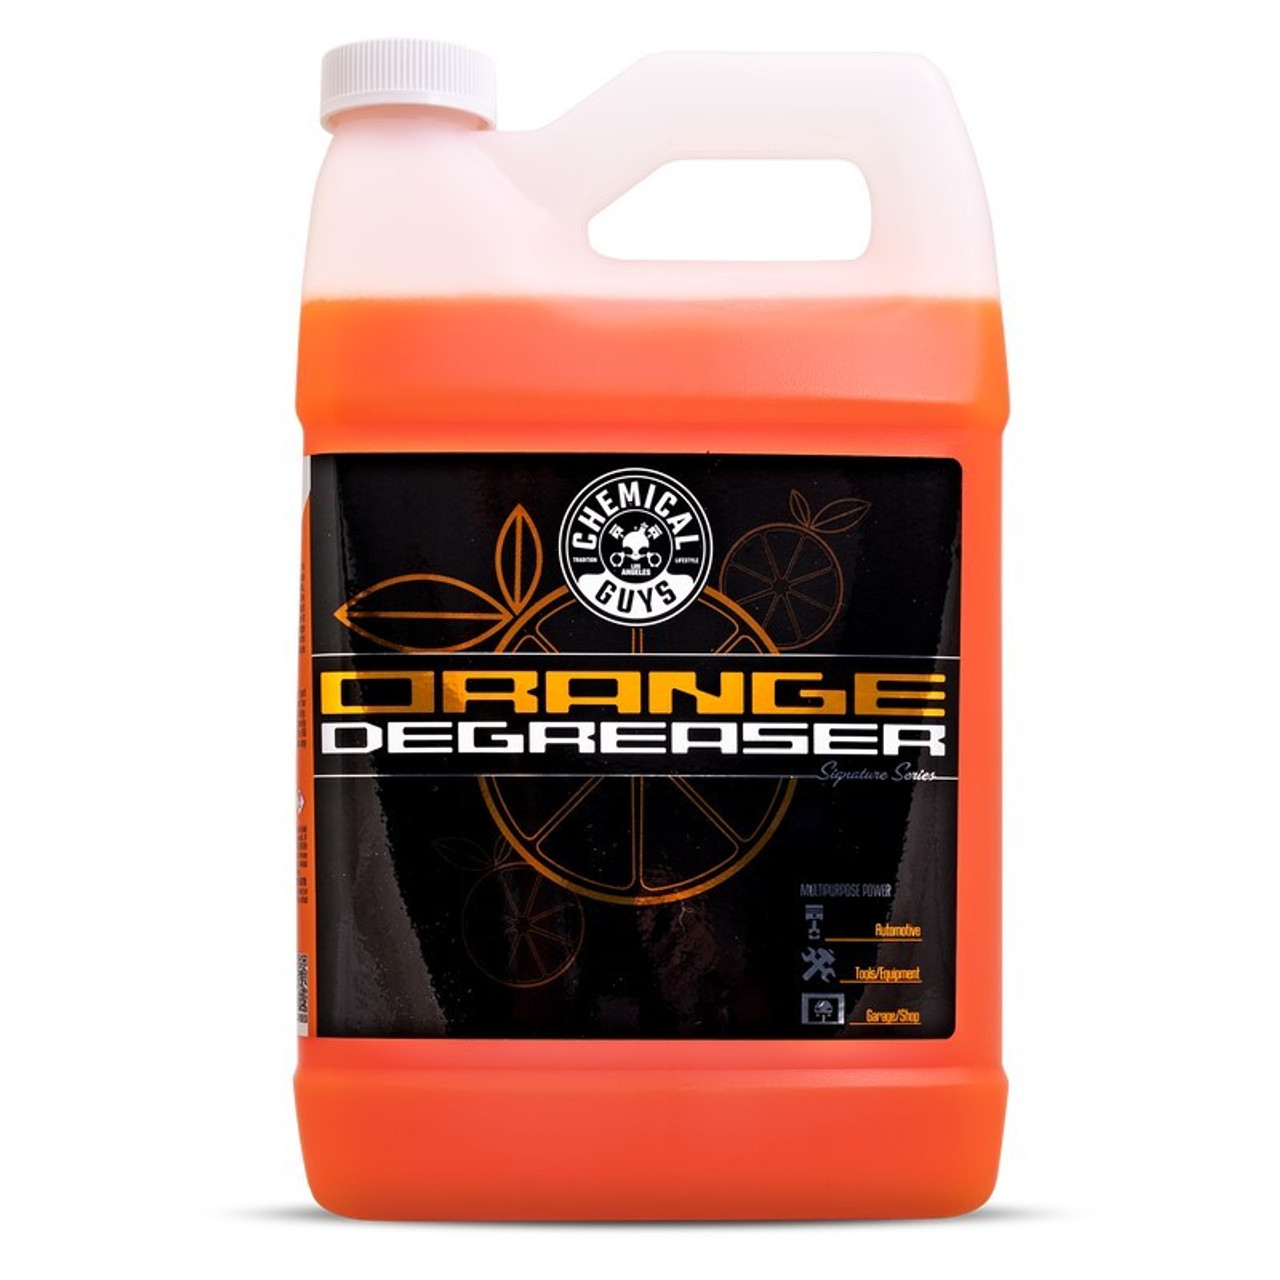 CHEMICAL GUYS LEATHER CONDITIONER GALLON